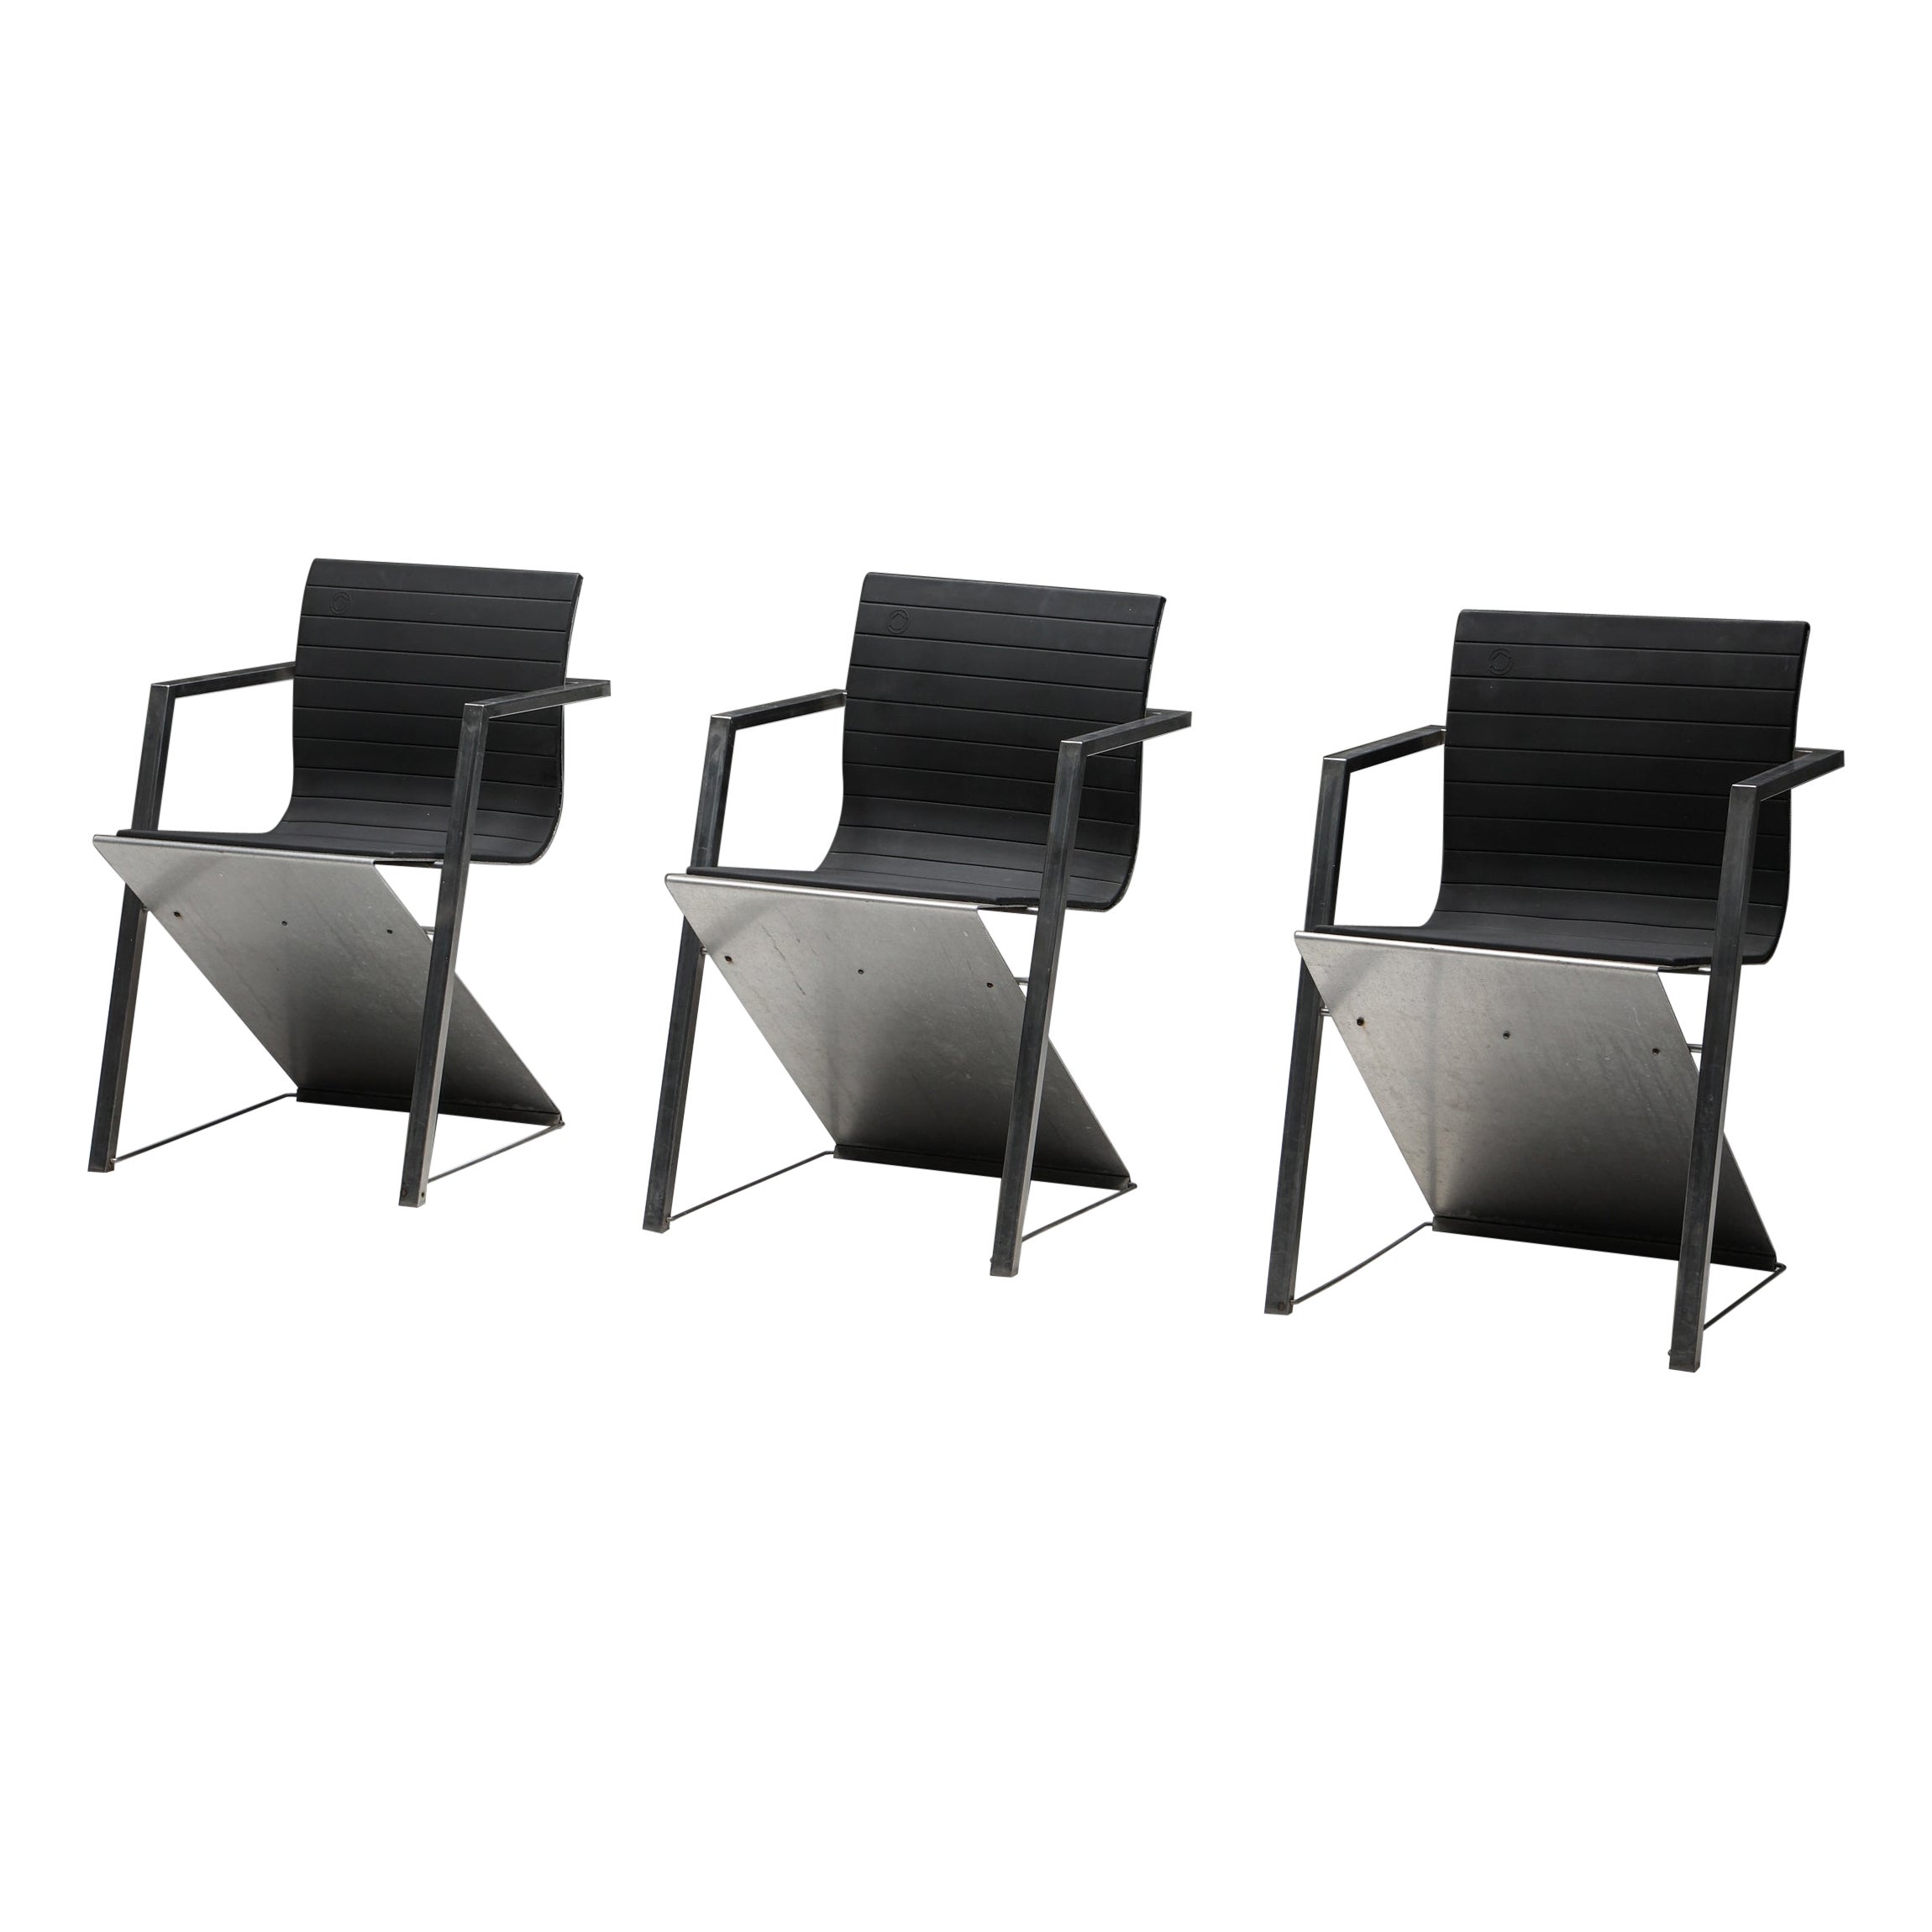 Pentagon Group Casino Model ‘D8’ Black Chairs, Germany, 1987 For Sale